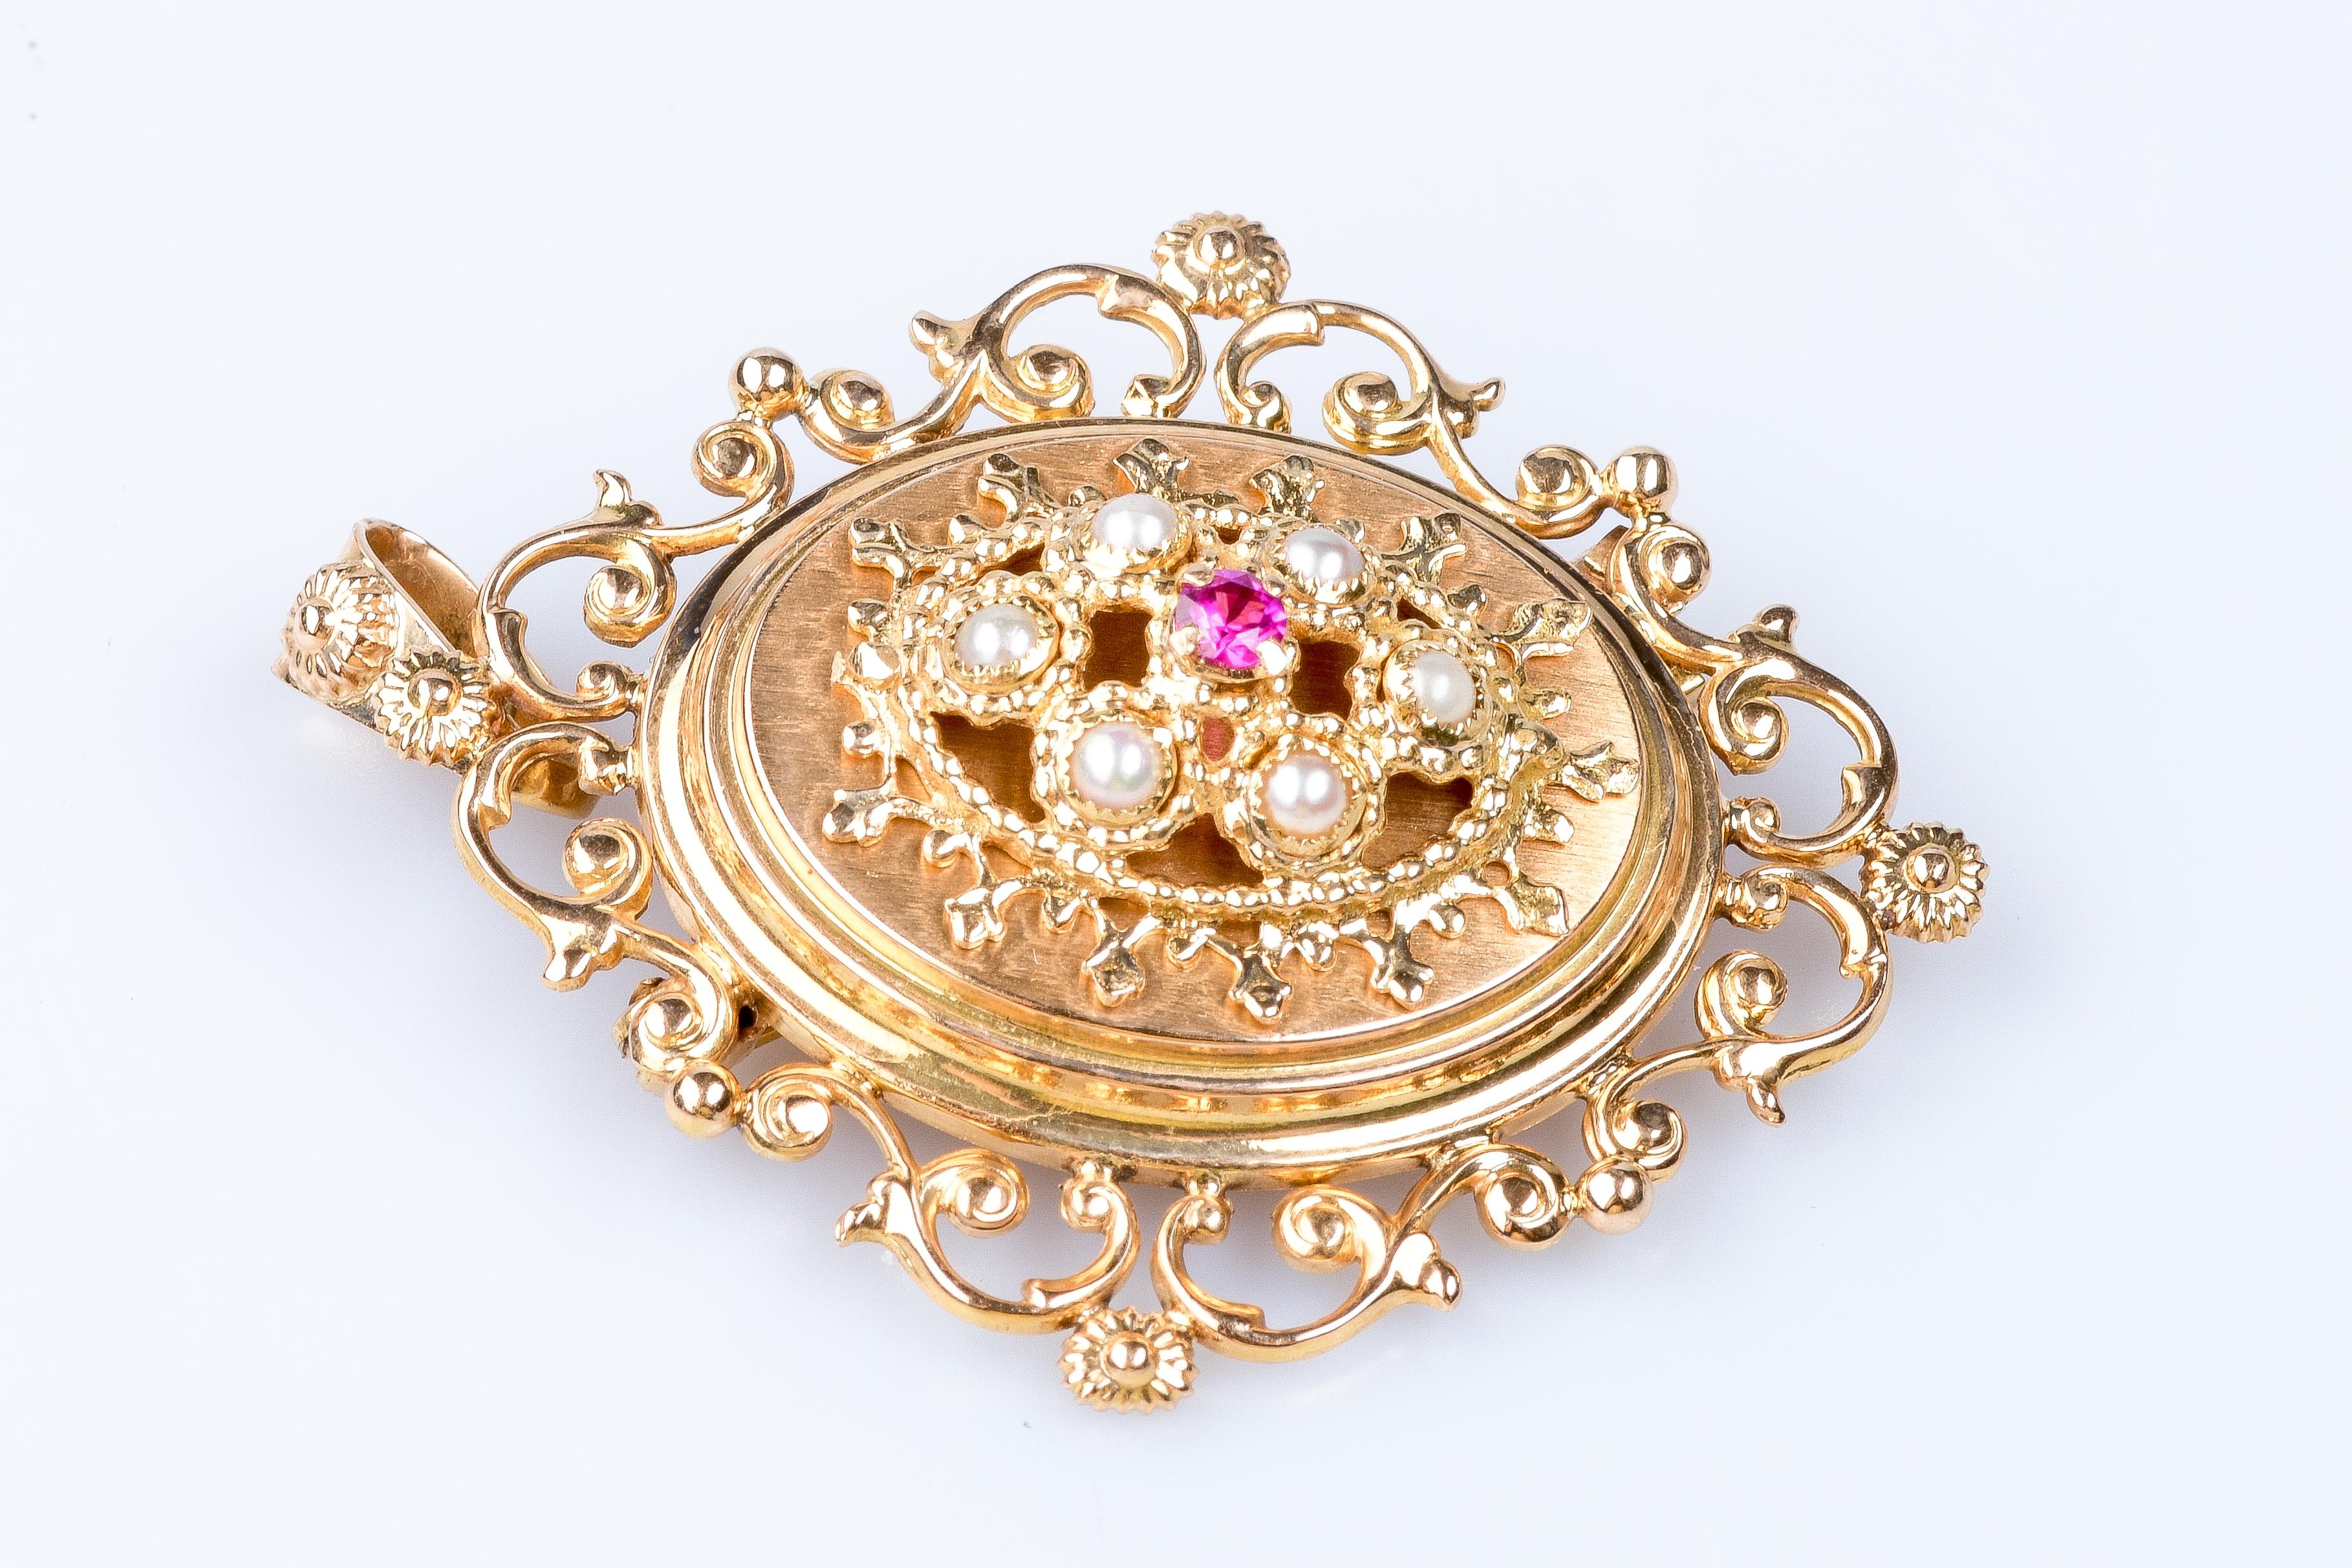 18 carat pink gold brooch or/and ruby and pearls pendant For Sale 2